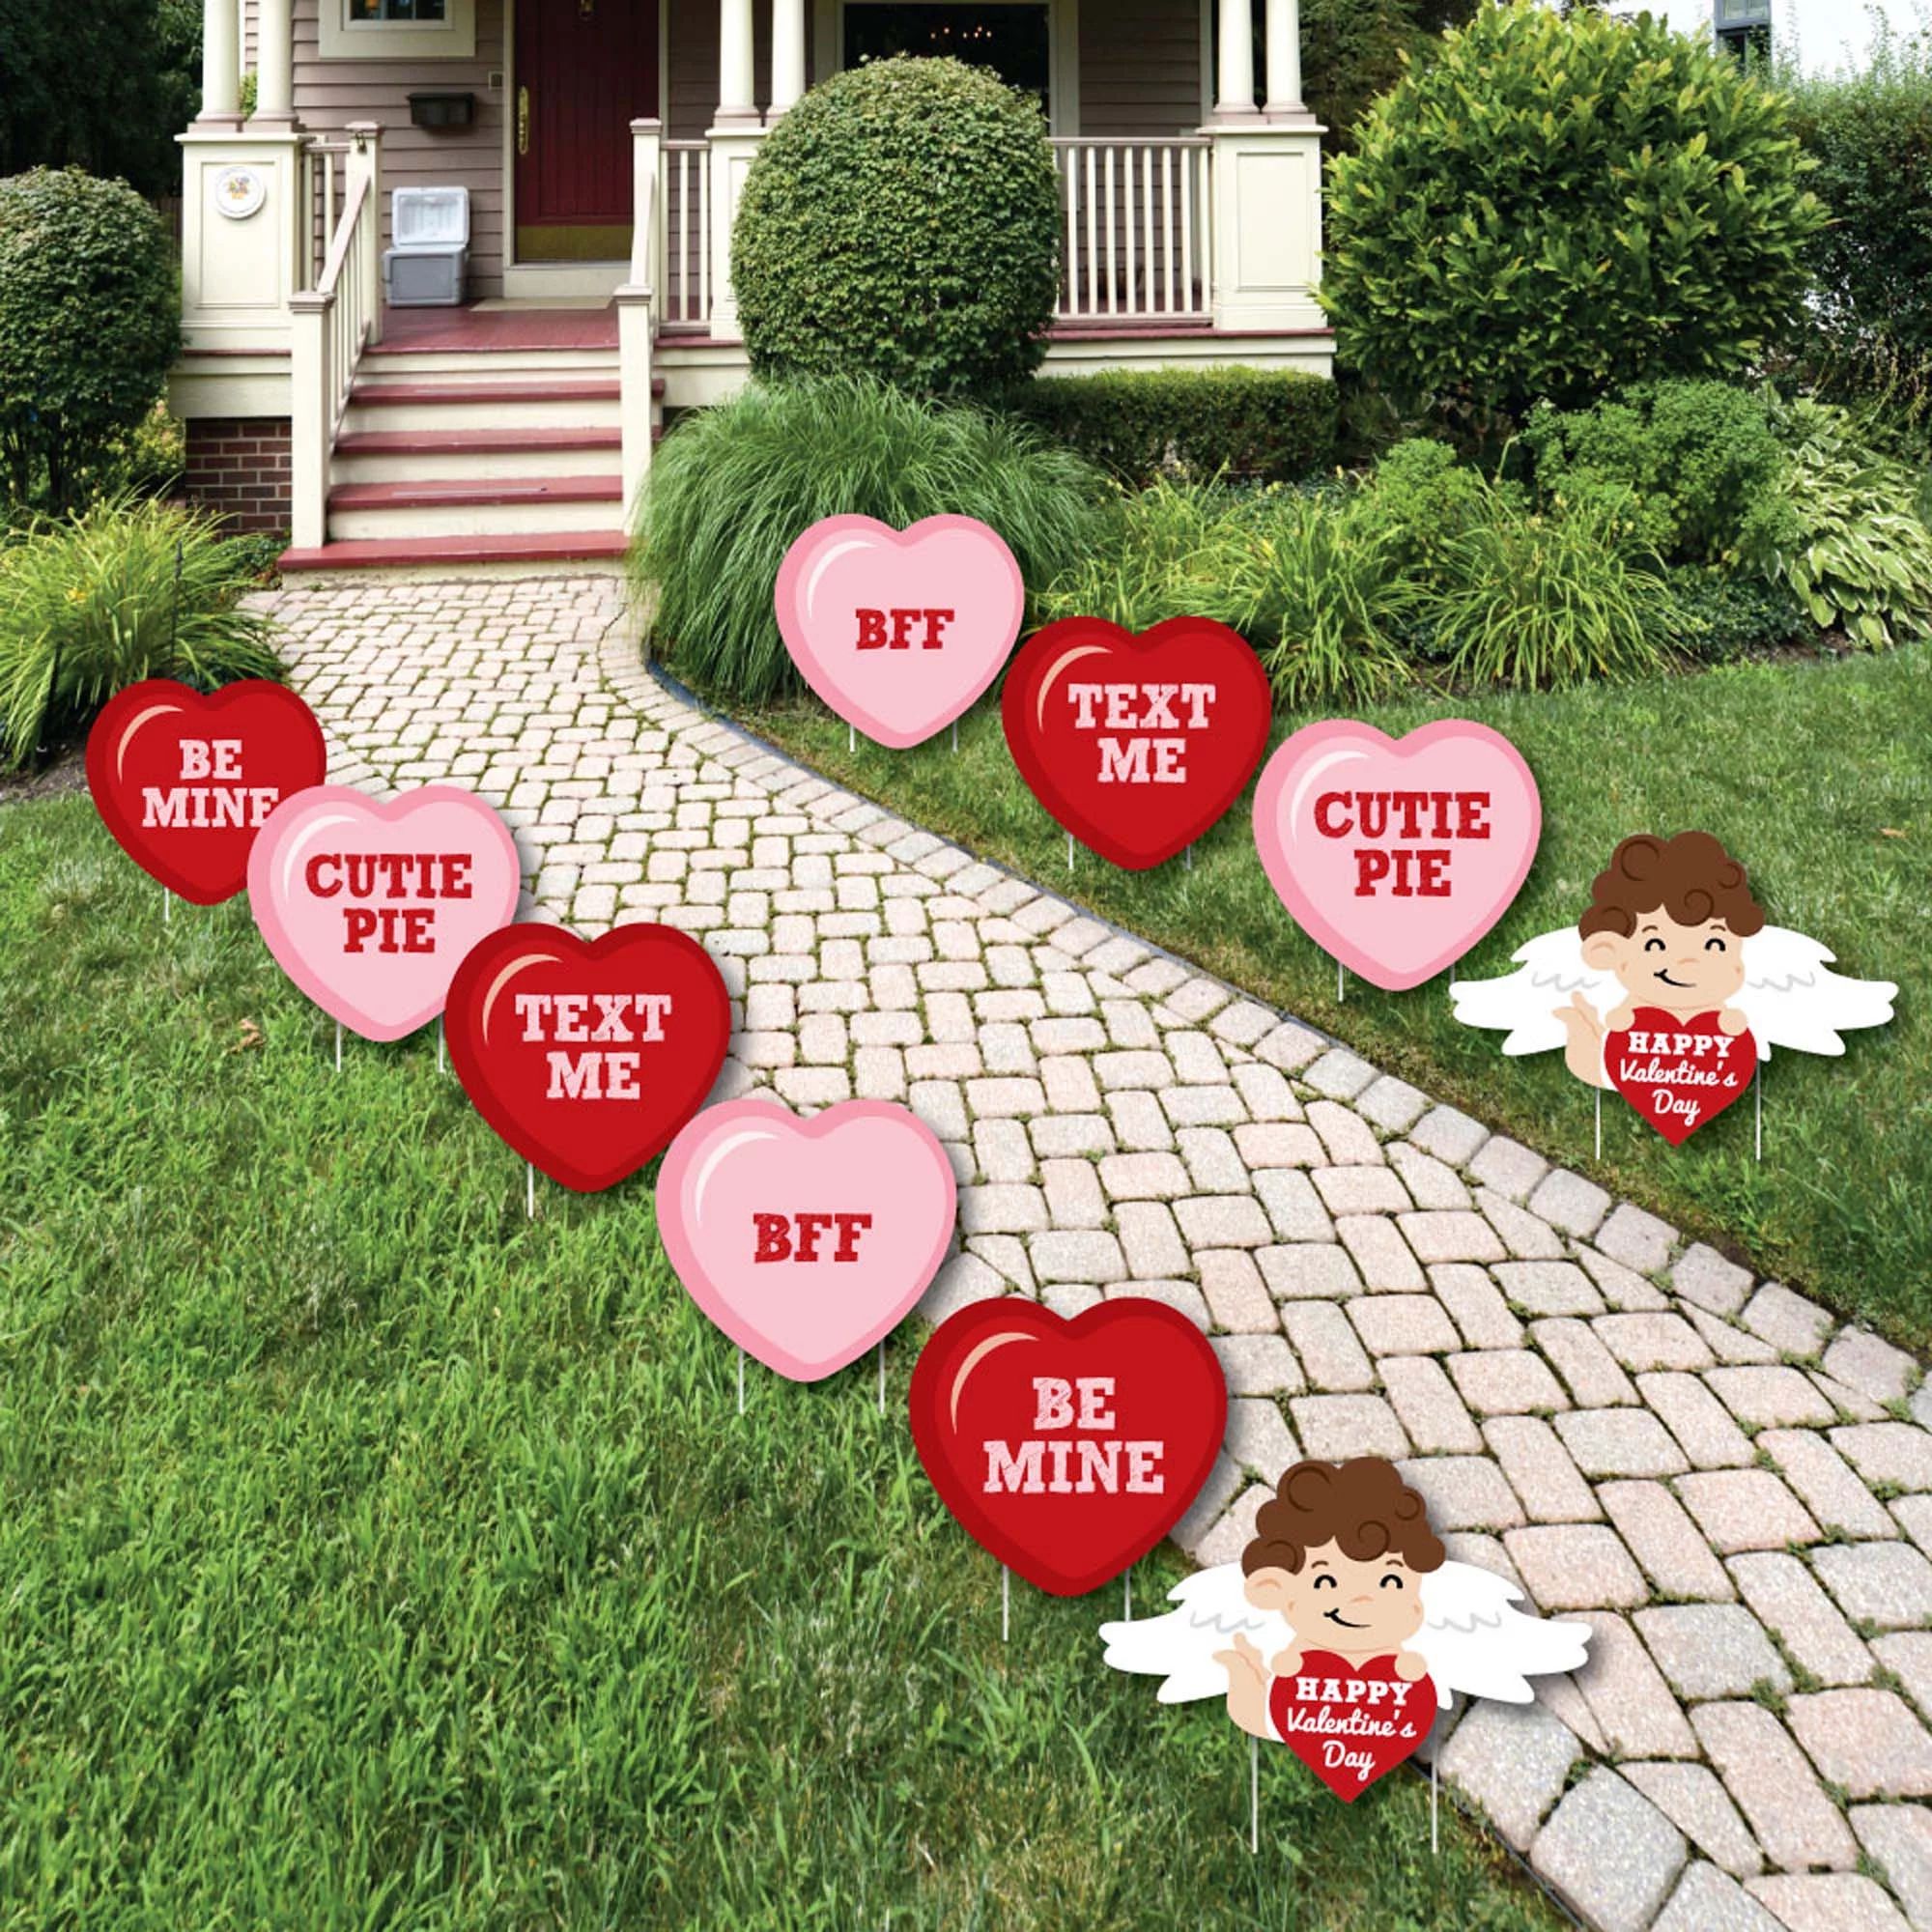 Conversation Hearts - Cupid and Heart Lawn Decorations - Outdoor Valentine's Day Party Yard Decor... | Walmart (US)